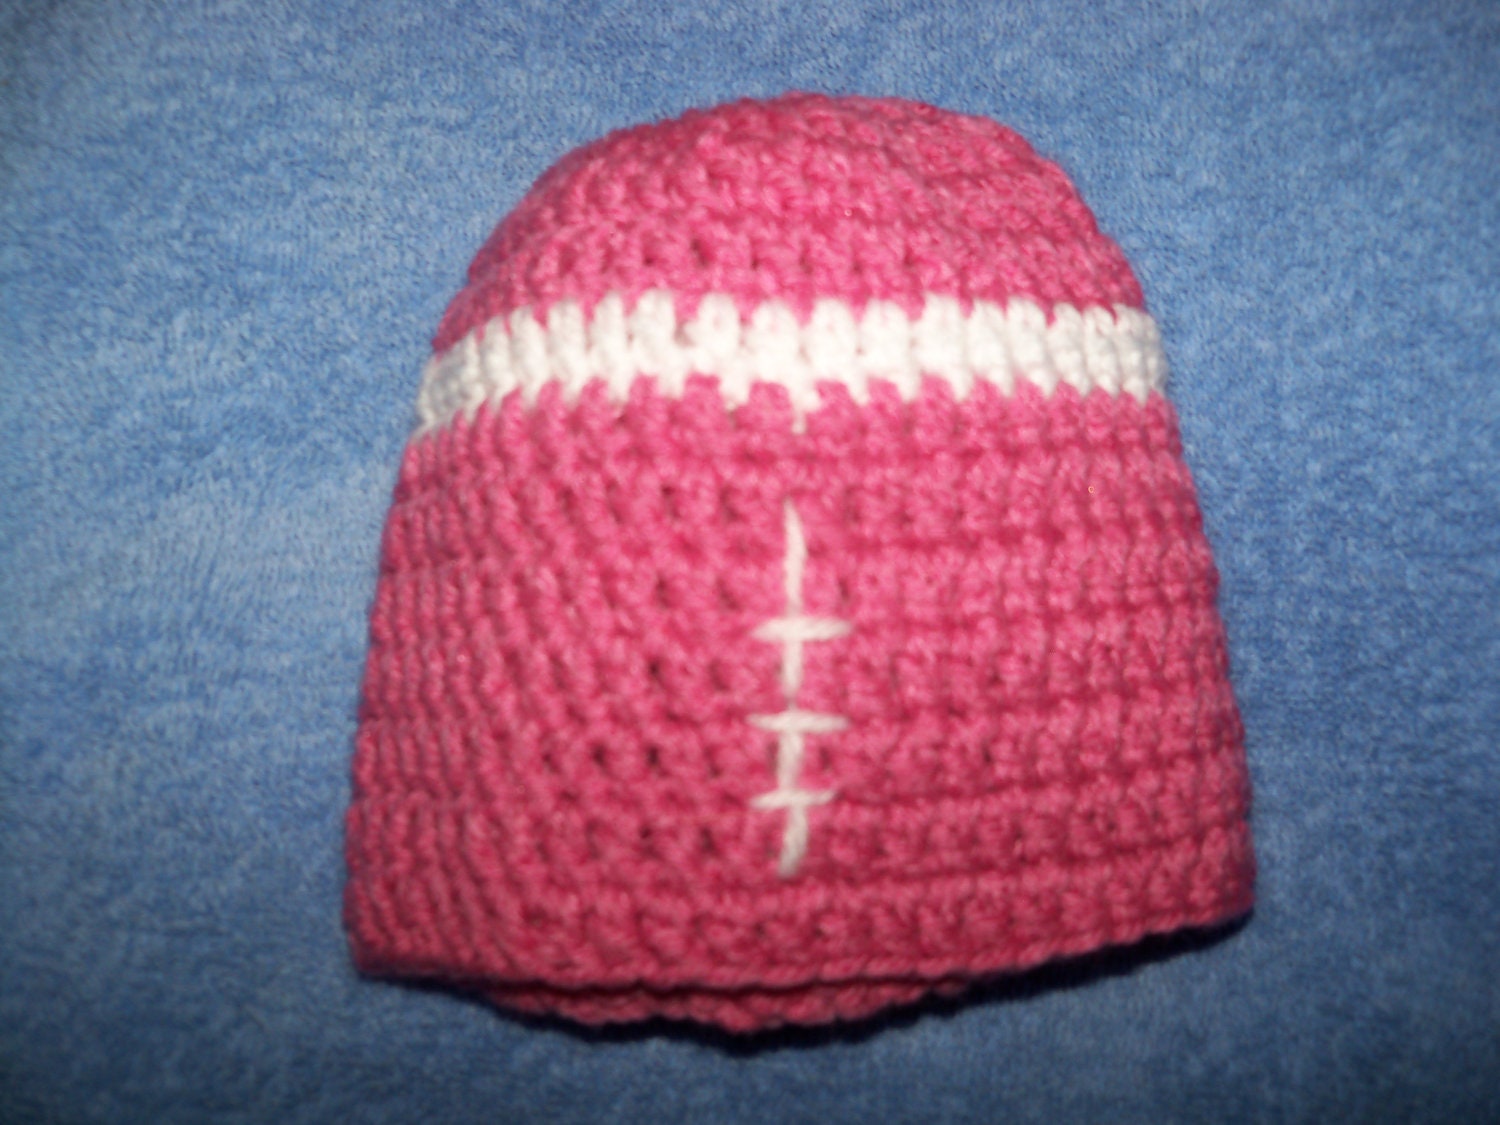 Crocheted Girlie Football Baby Hat - Pink - Size 6 months